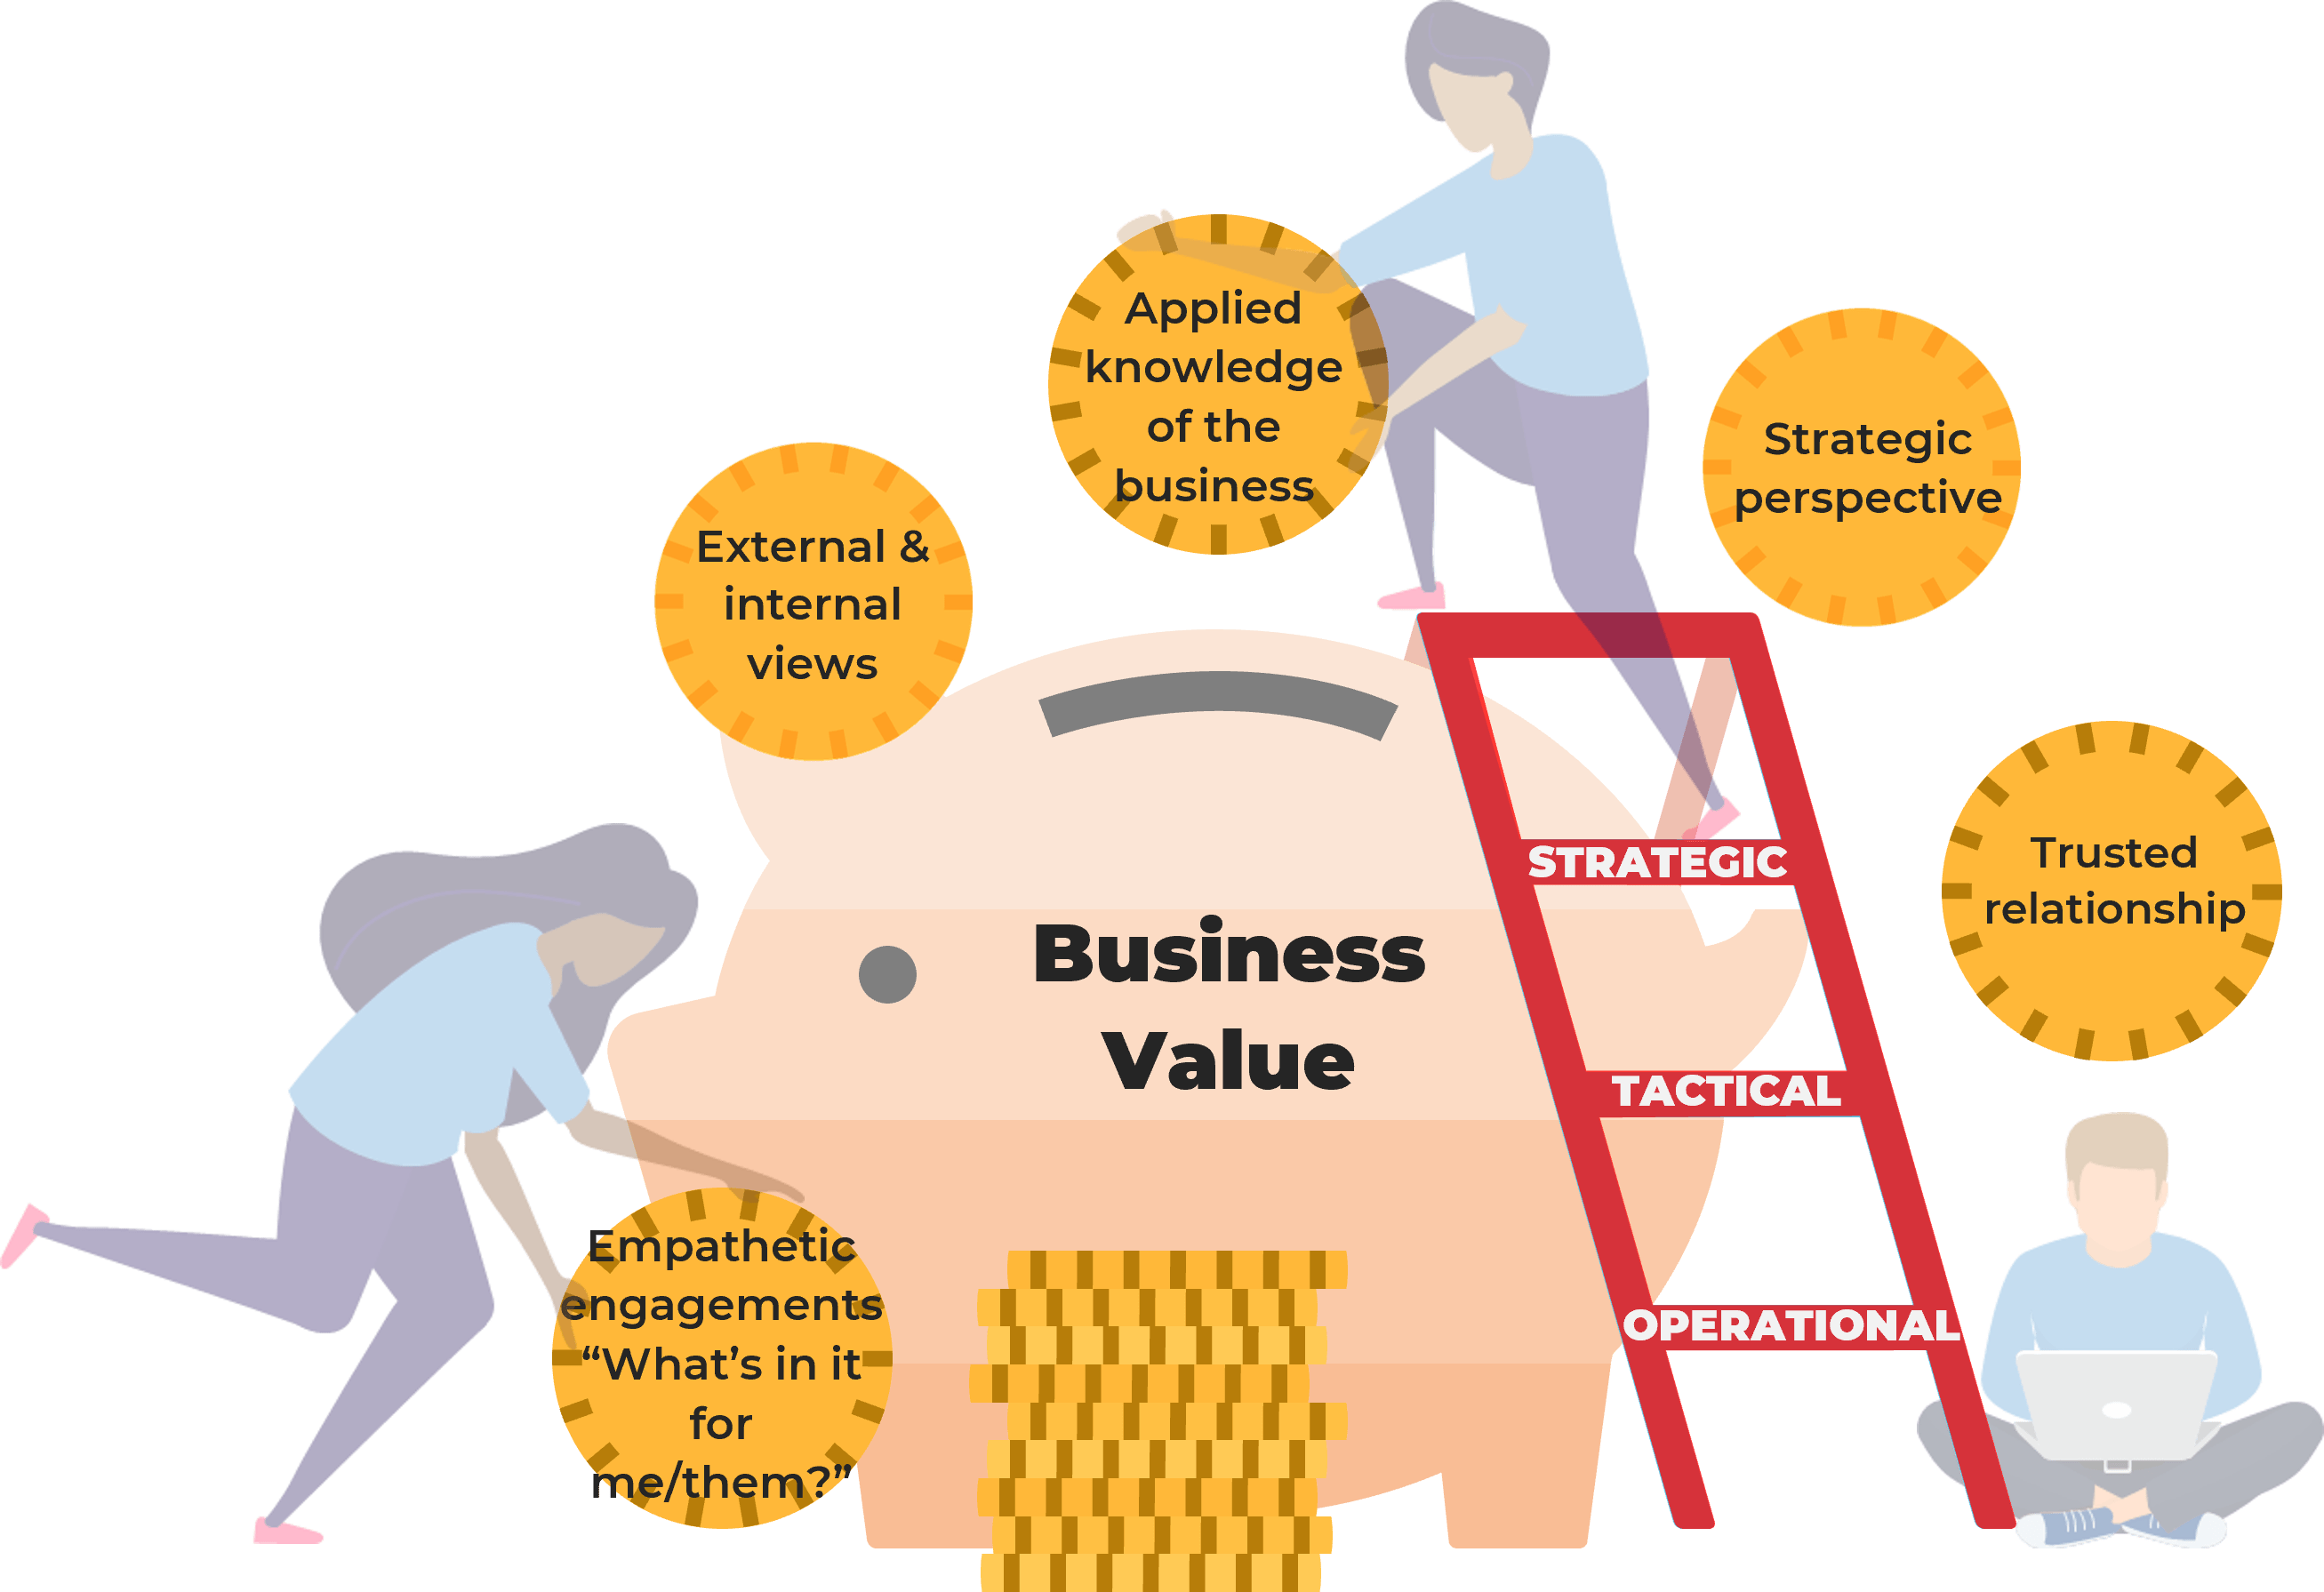 Visualization of a piggy bank labelled 'Business Value' with a person on a ladder labelled 'Strategic Tactical Operational' putting coins into the bank which are labelled 'External & internal views', 'Applied knowledge of the business', 'Strategic perspective', 'Trusted relationship', and 'Empathetic engagements “What’s in it for me/them?”'.